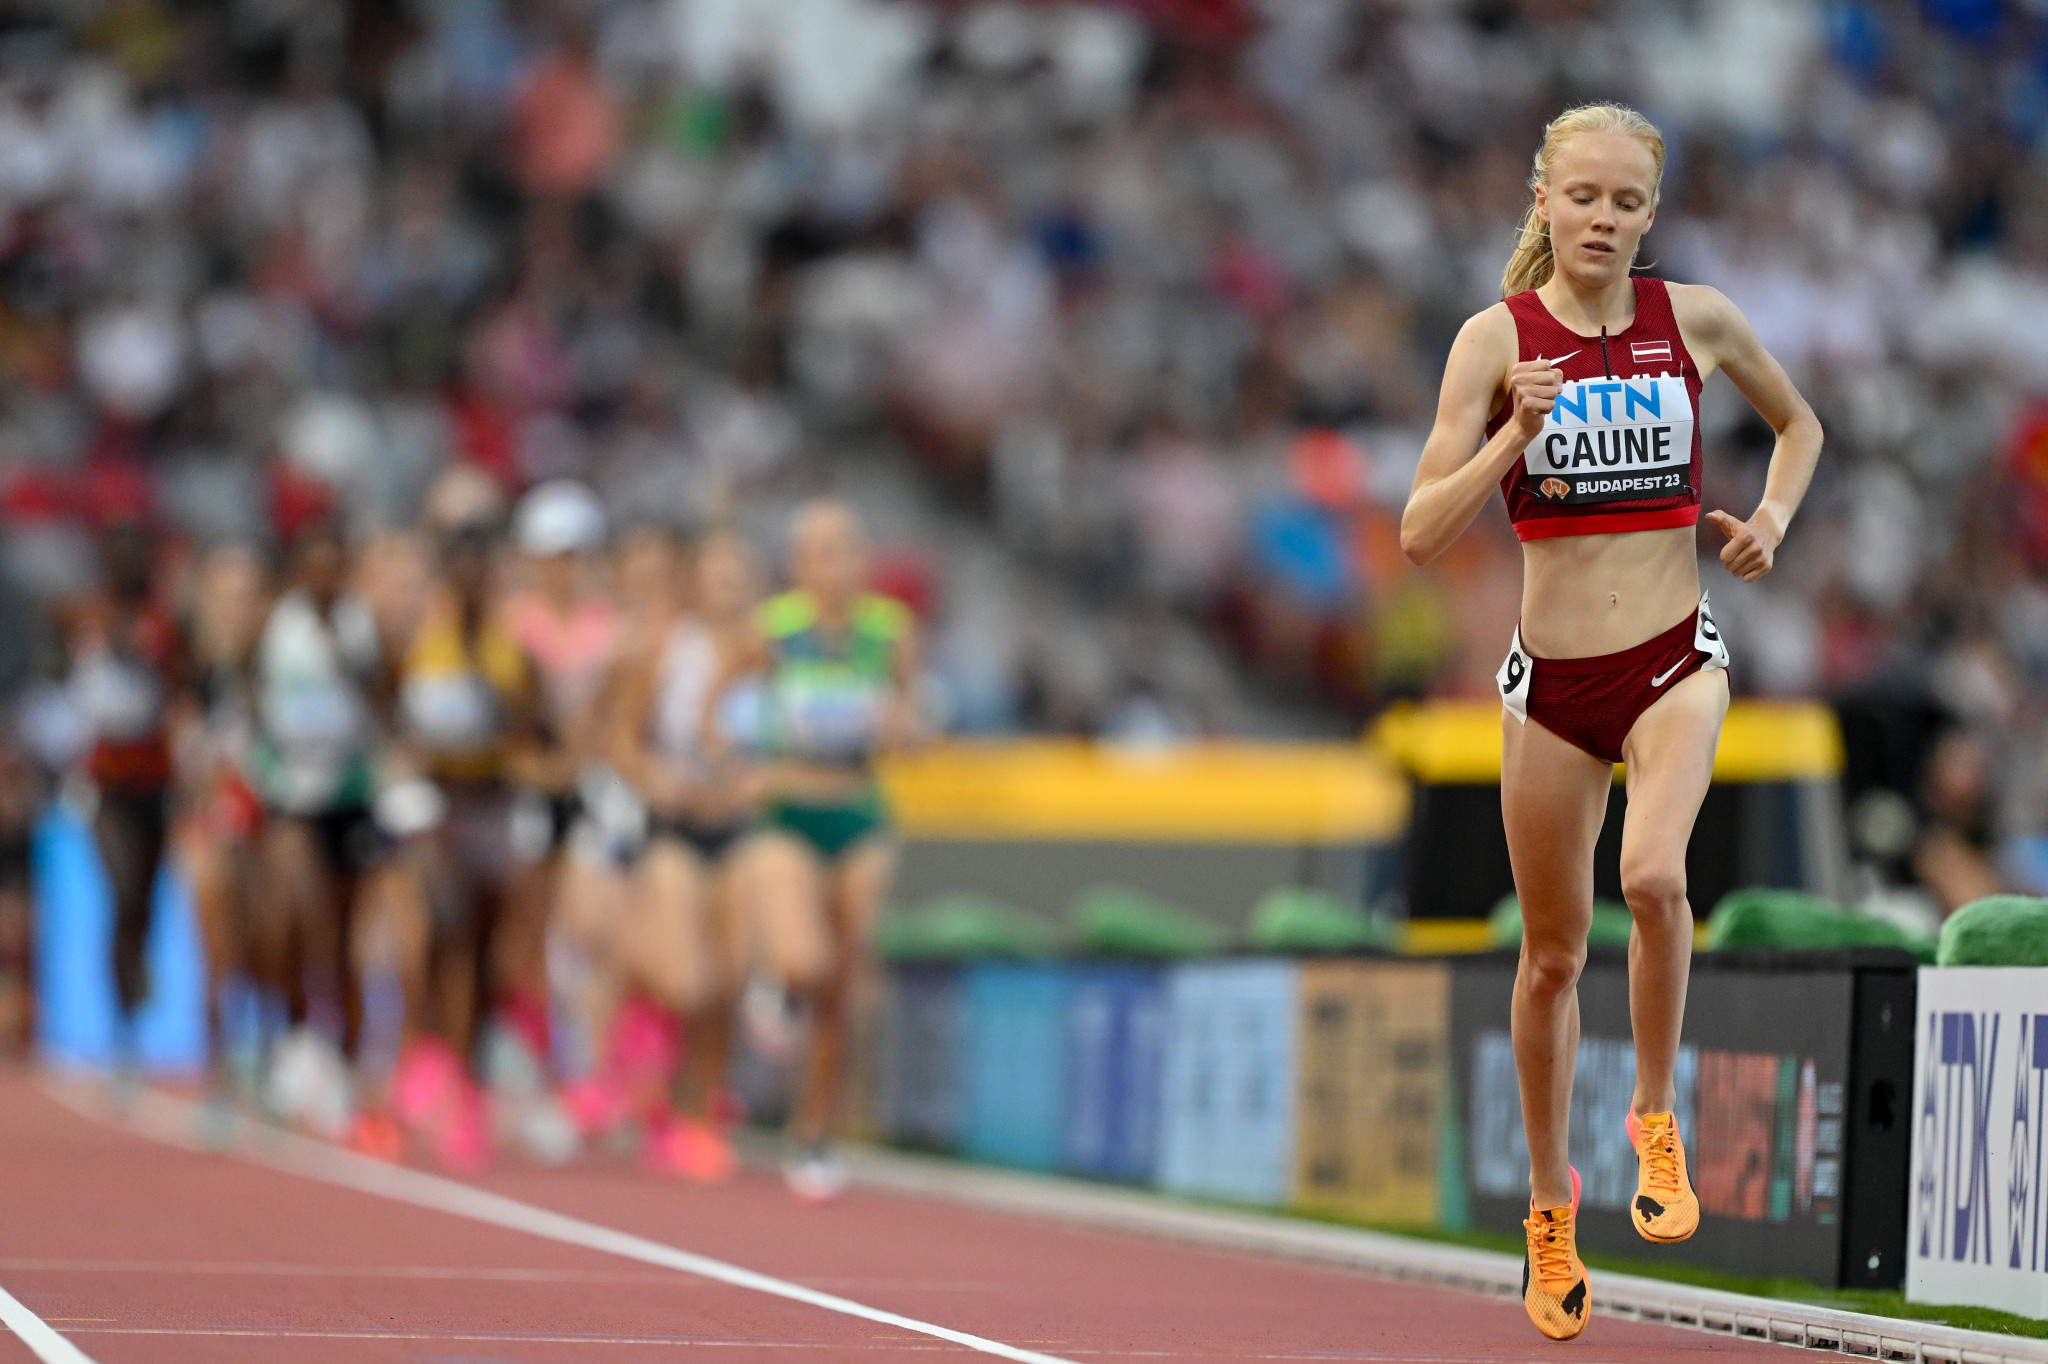 Latvia's under-20 European champion Agate Caune qualified for the women's 5,000m final in fourth place in her heat, after a stunning solo run for most of the race ©Getty Images